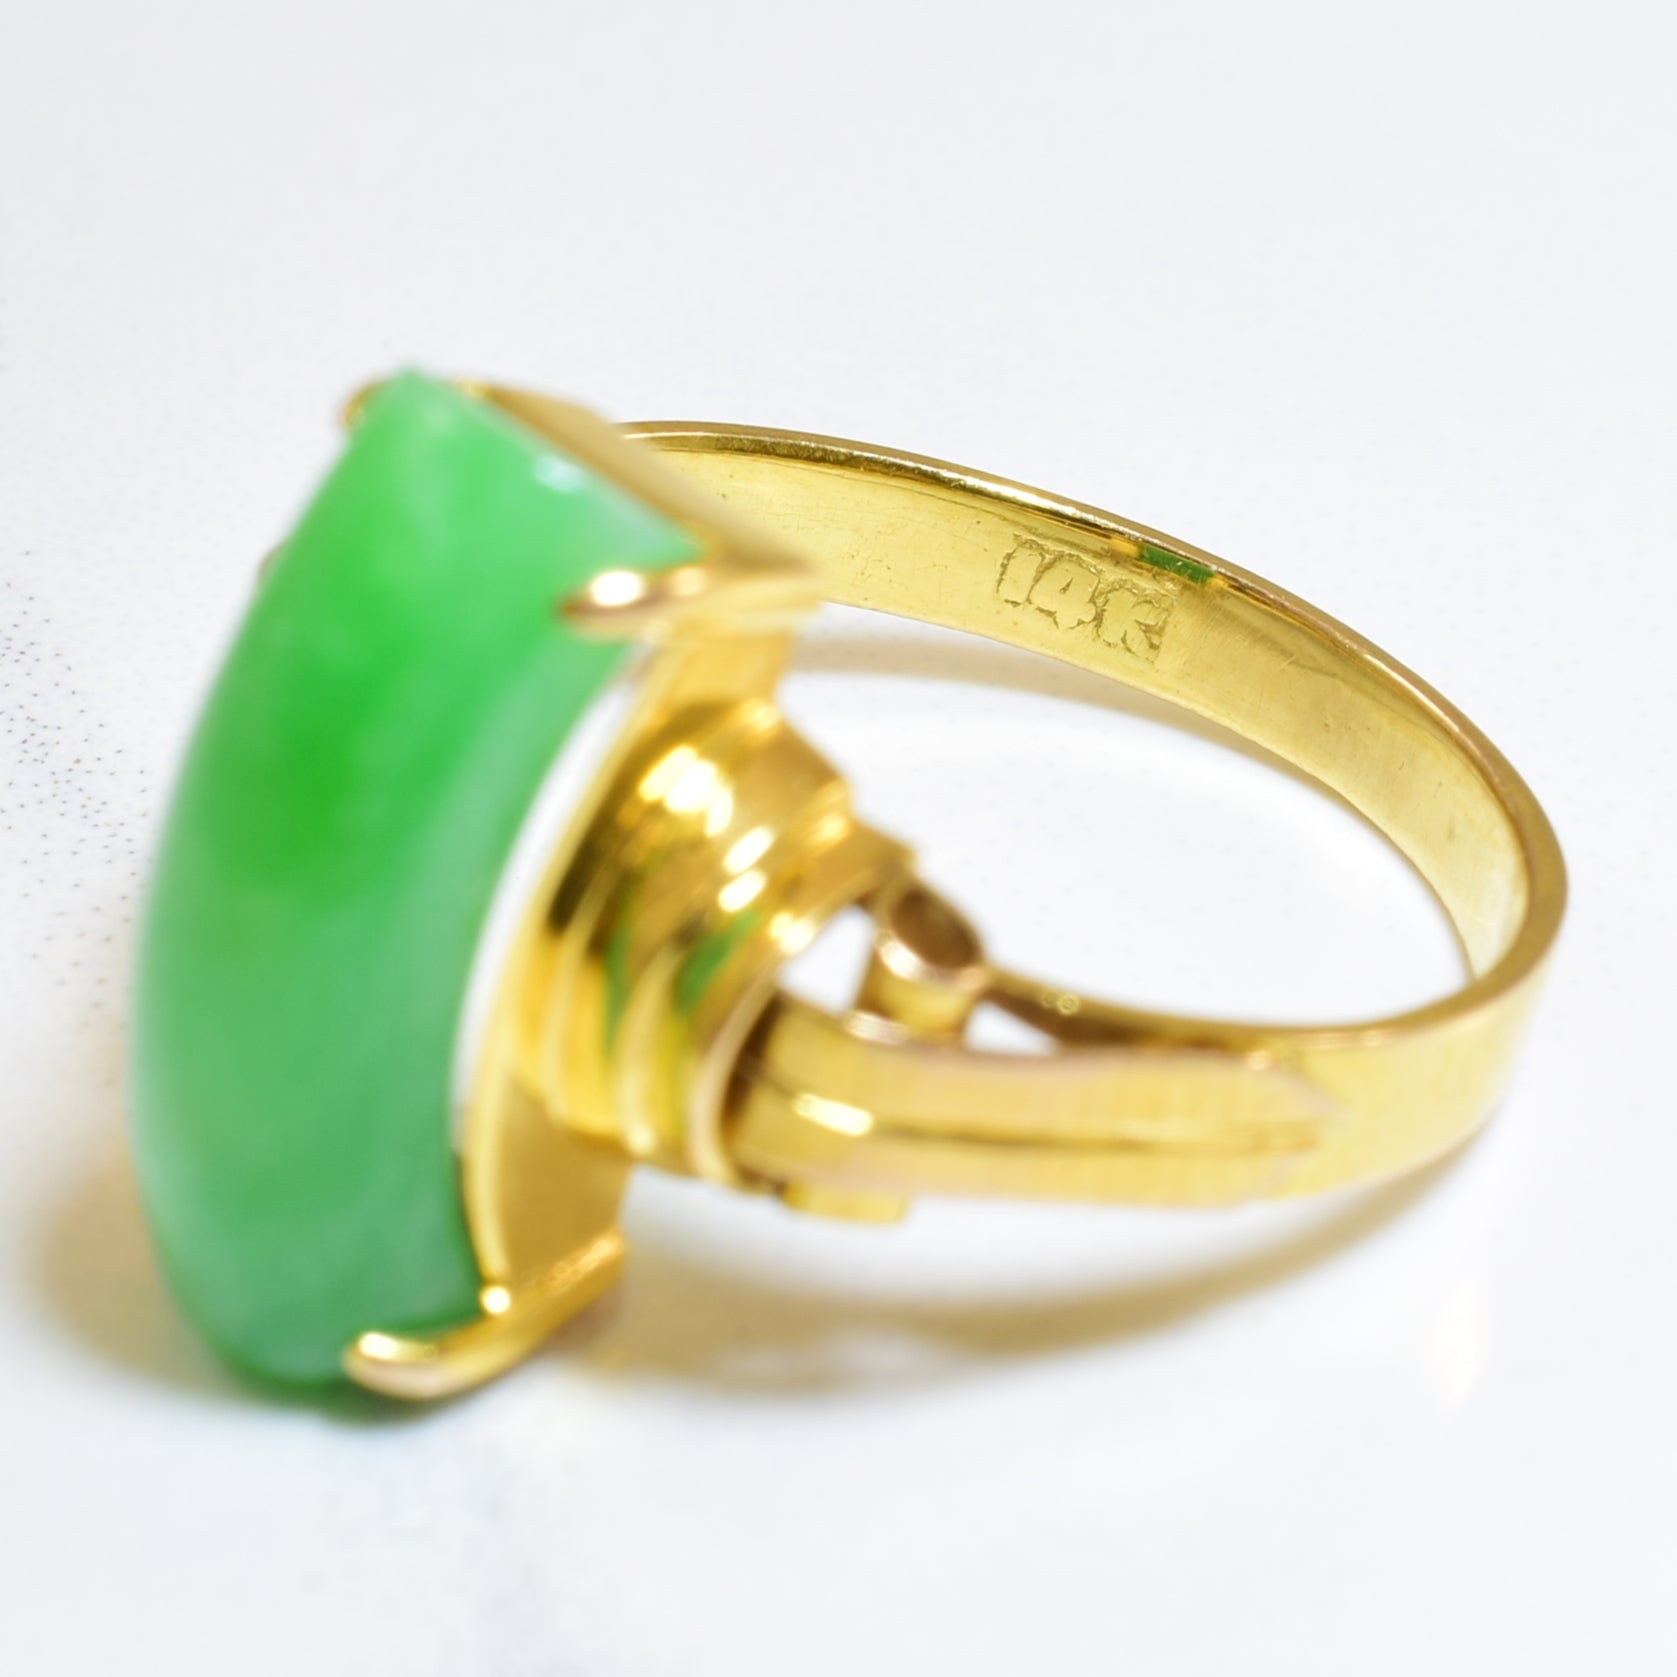 Curved Jadeite Cabochon Ring | 2.50ct | SZ 4.5 |